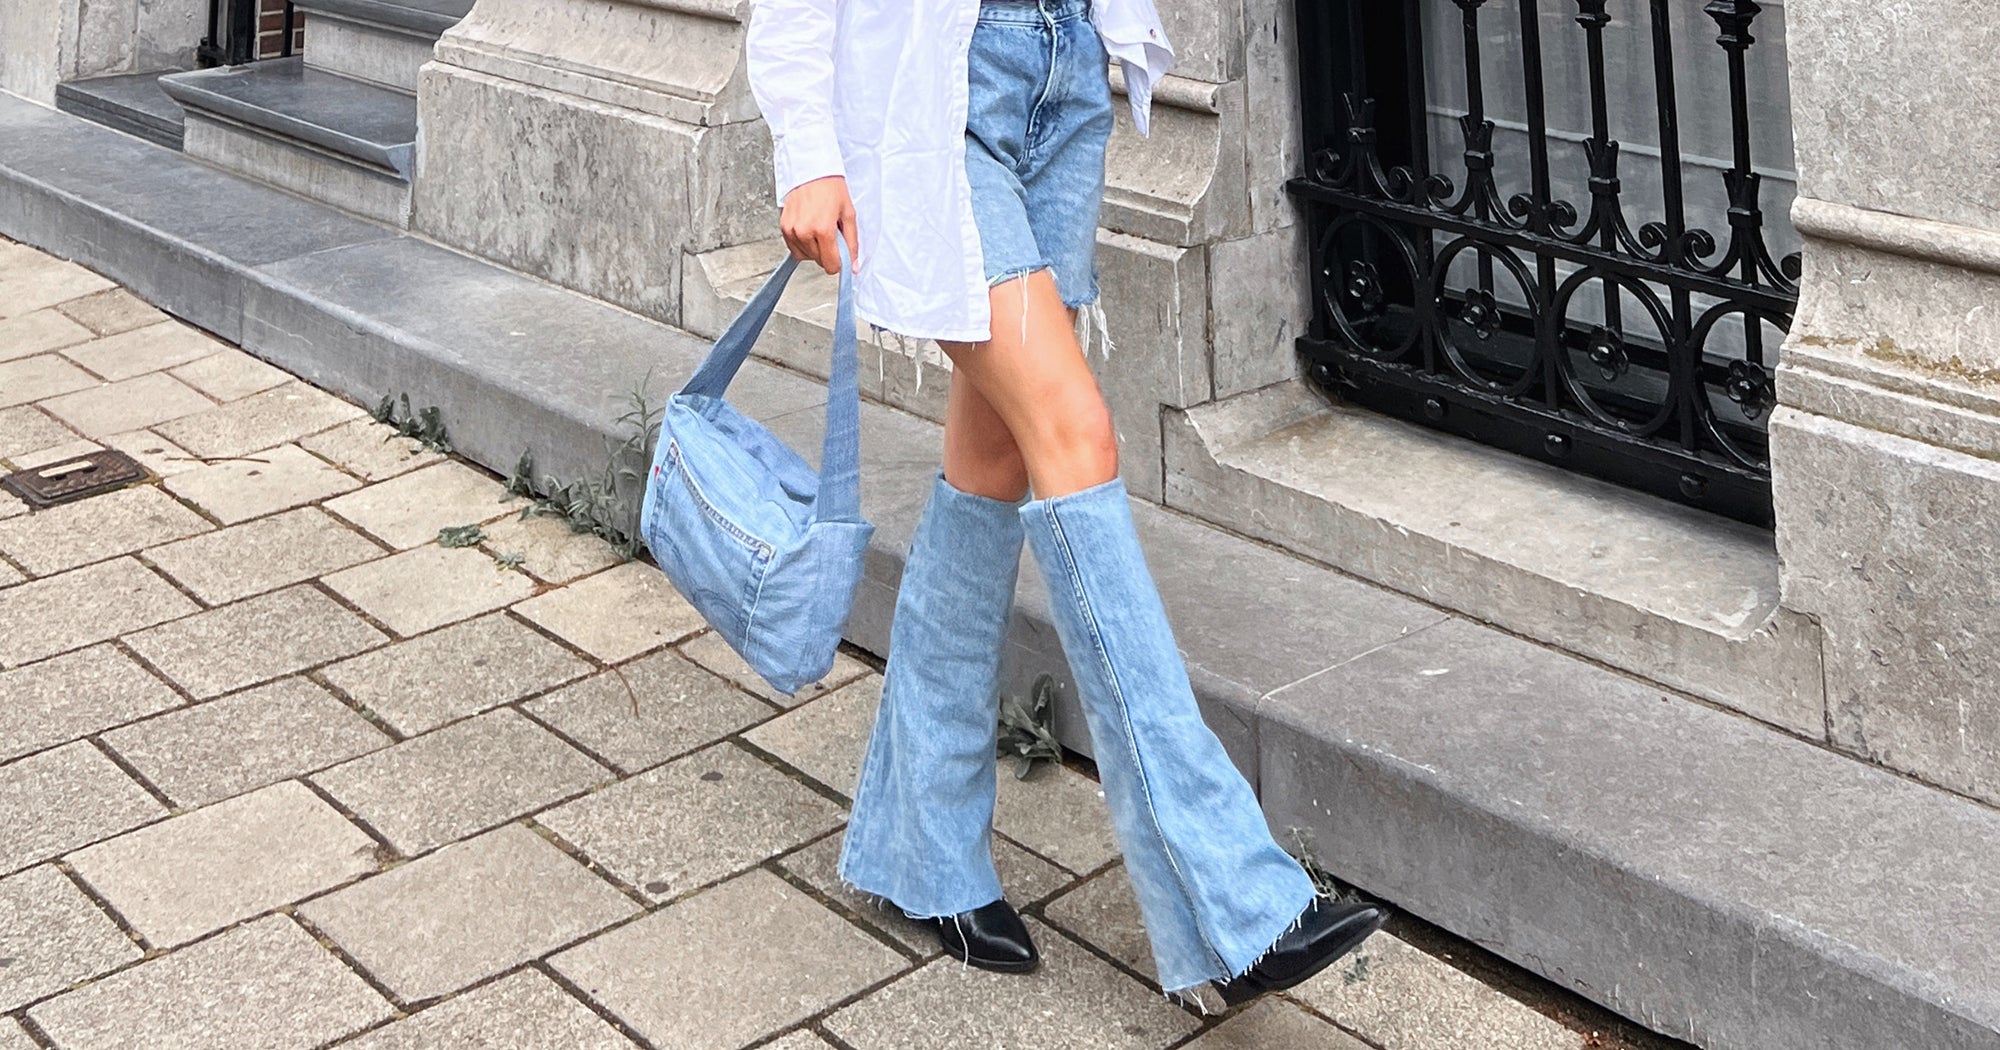 Denim Leg Warmers Are The TikTok-Approved Way To Upcycle Your Jeans